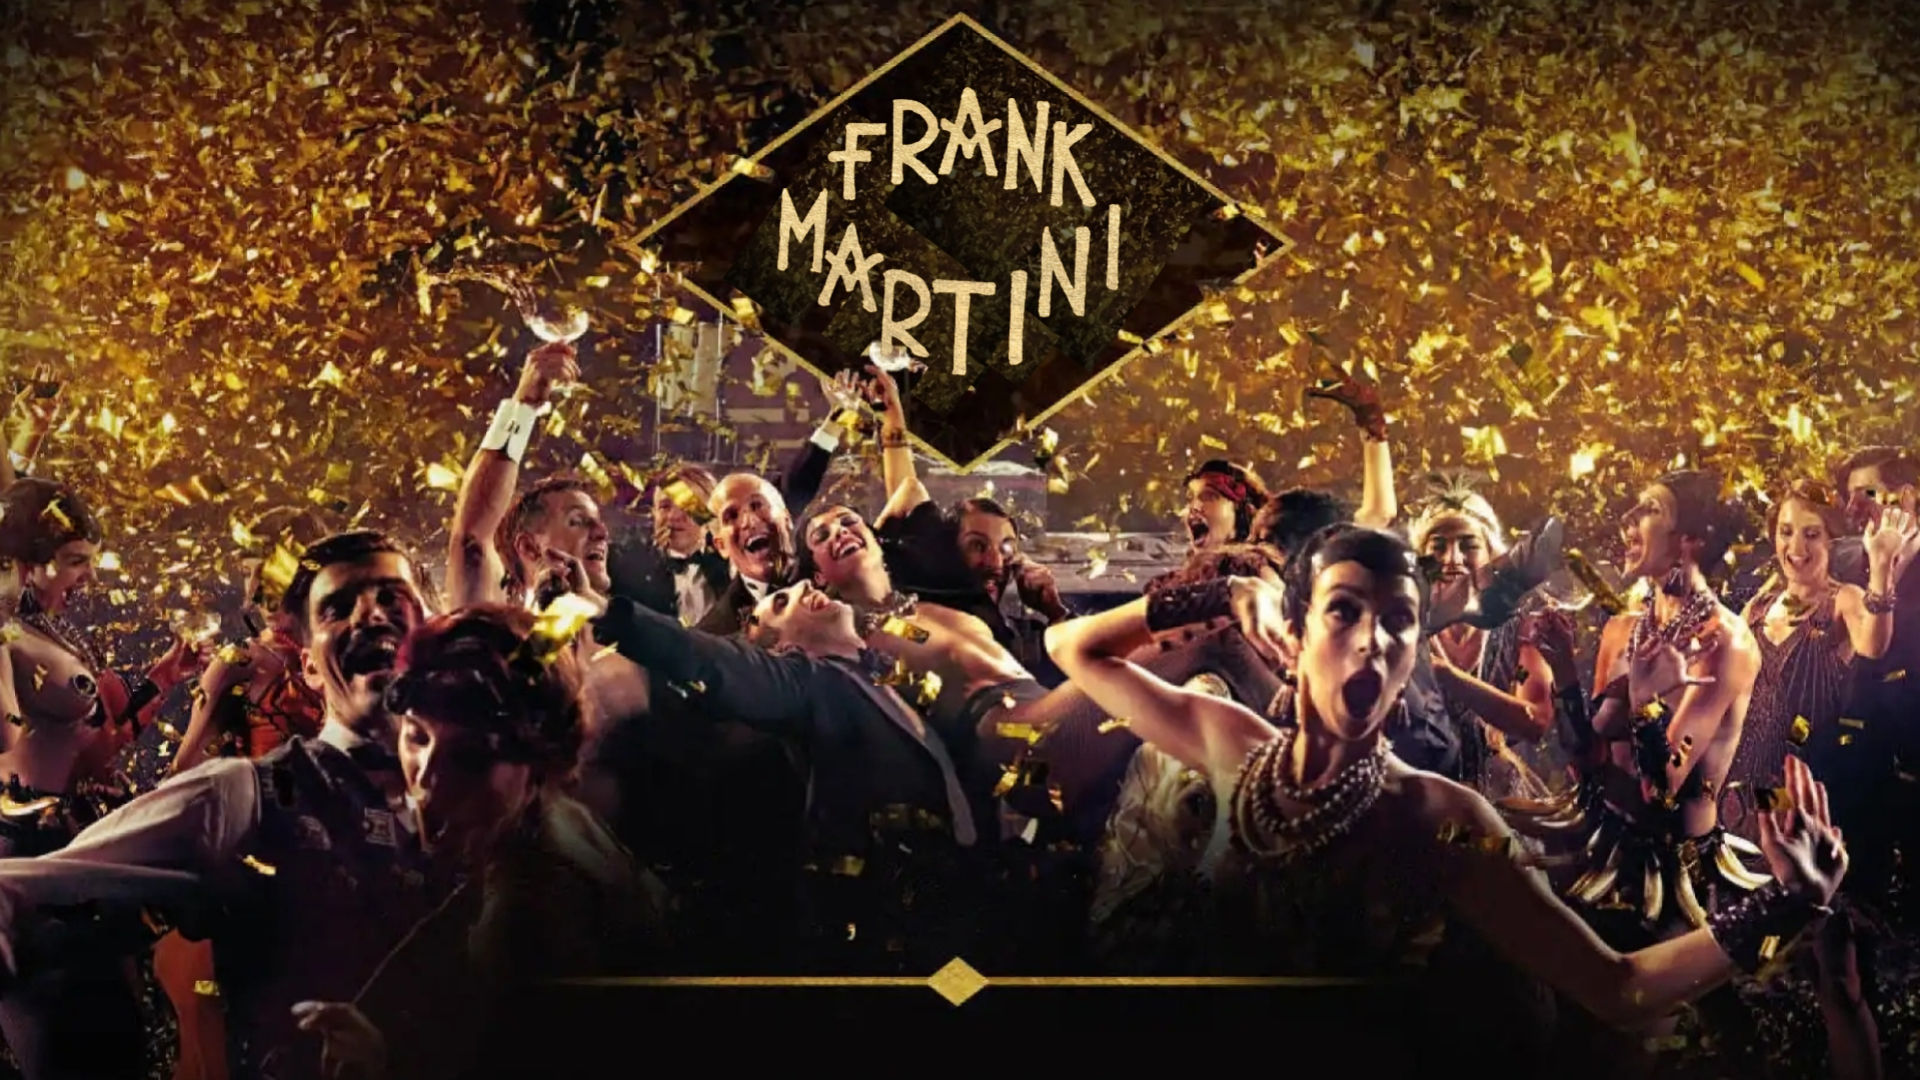 Frank Martini - Party of The Century